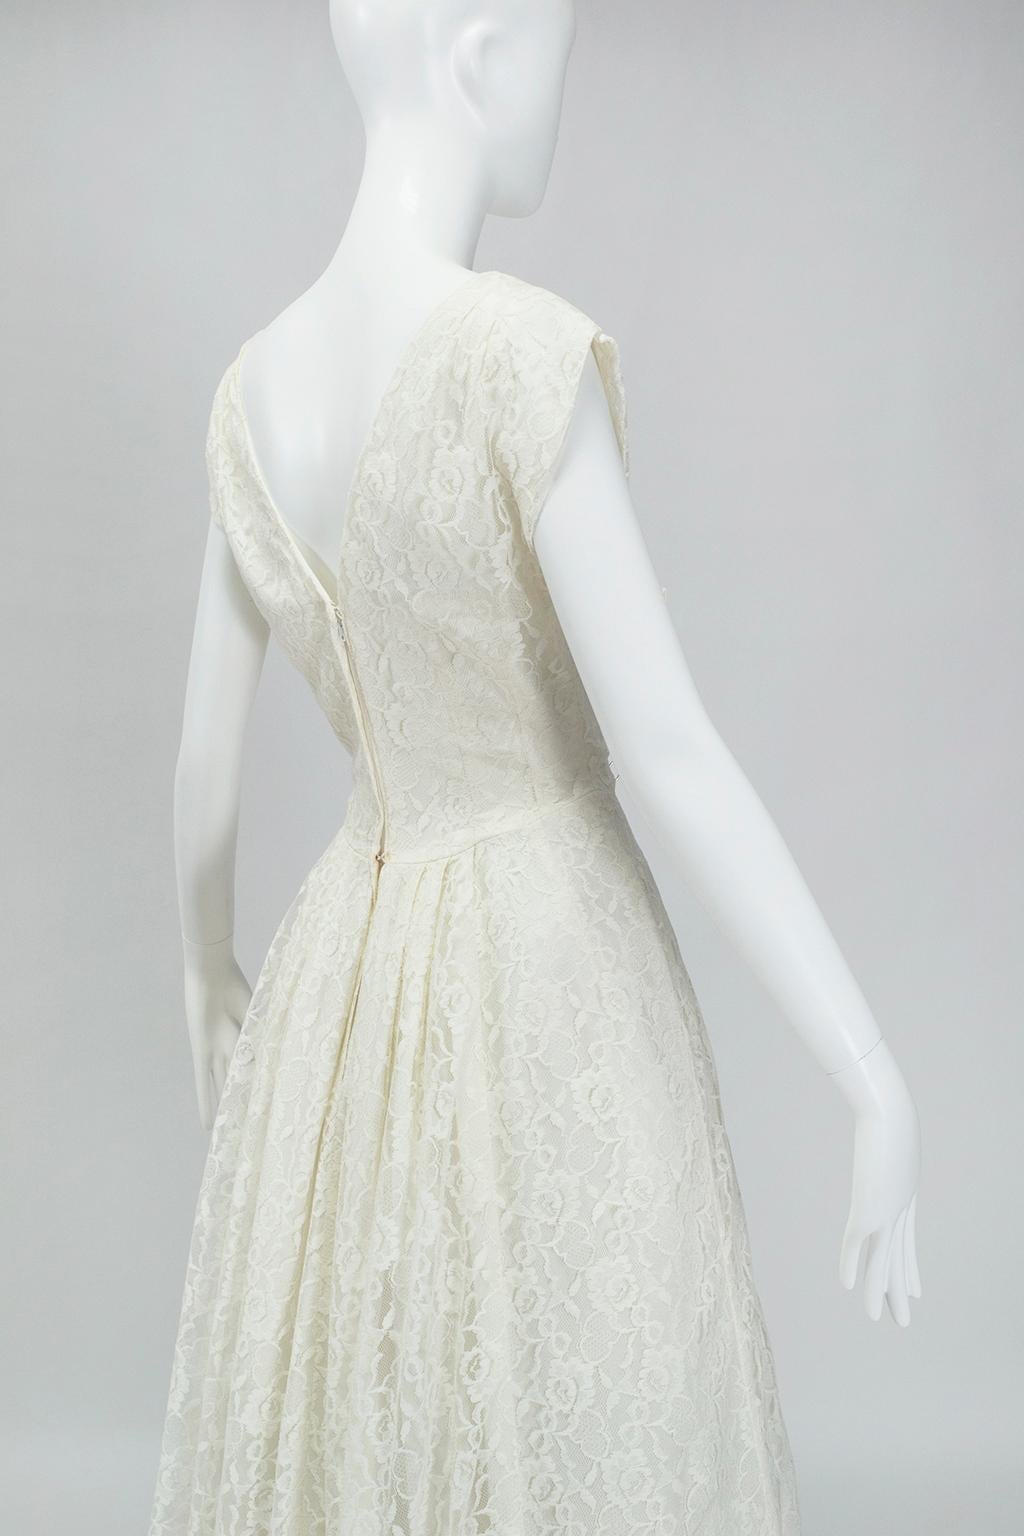 Emma Domb Ivory Floor Length Bateau Neck Wedding Gown with Empire Bow - S, 1950s For Sale 1